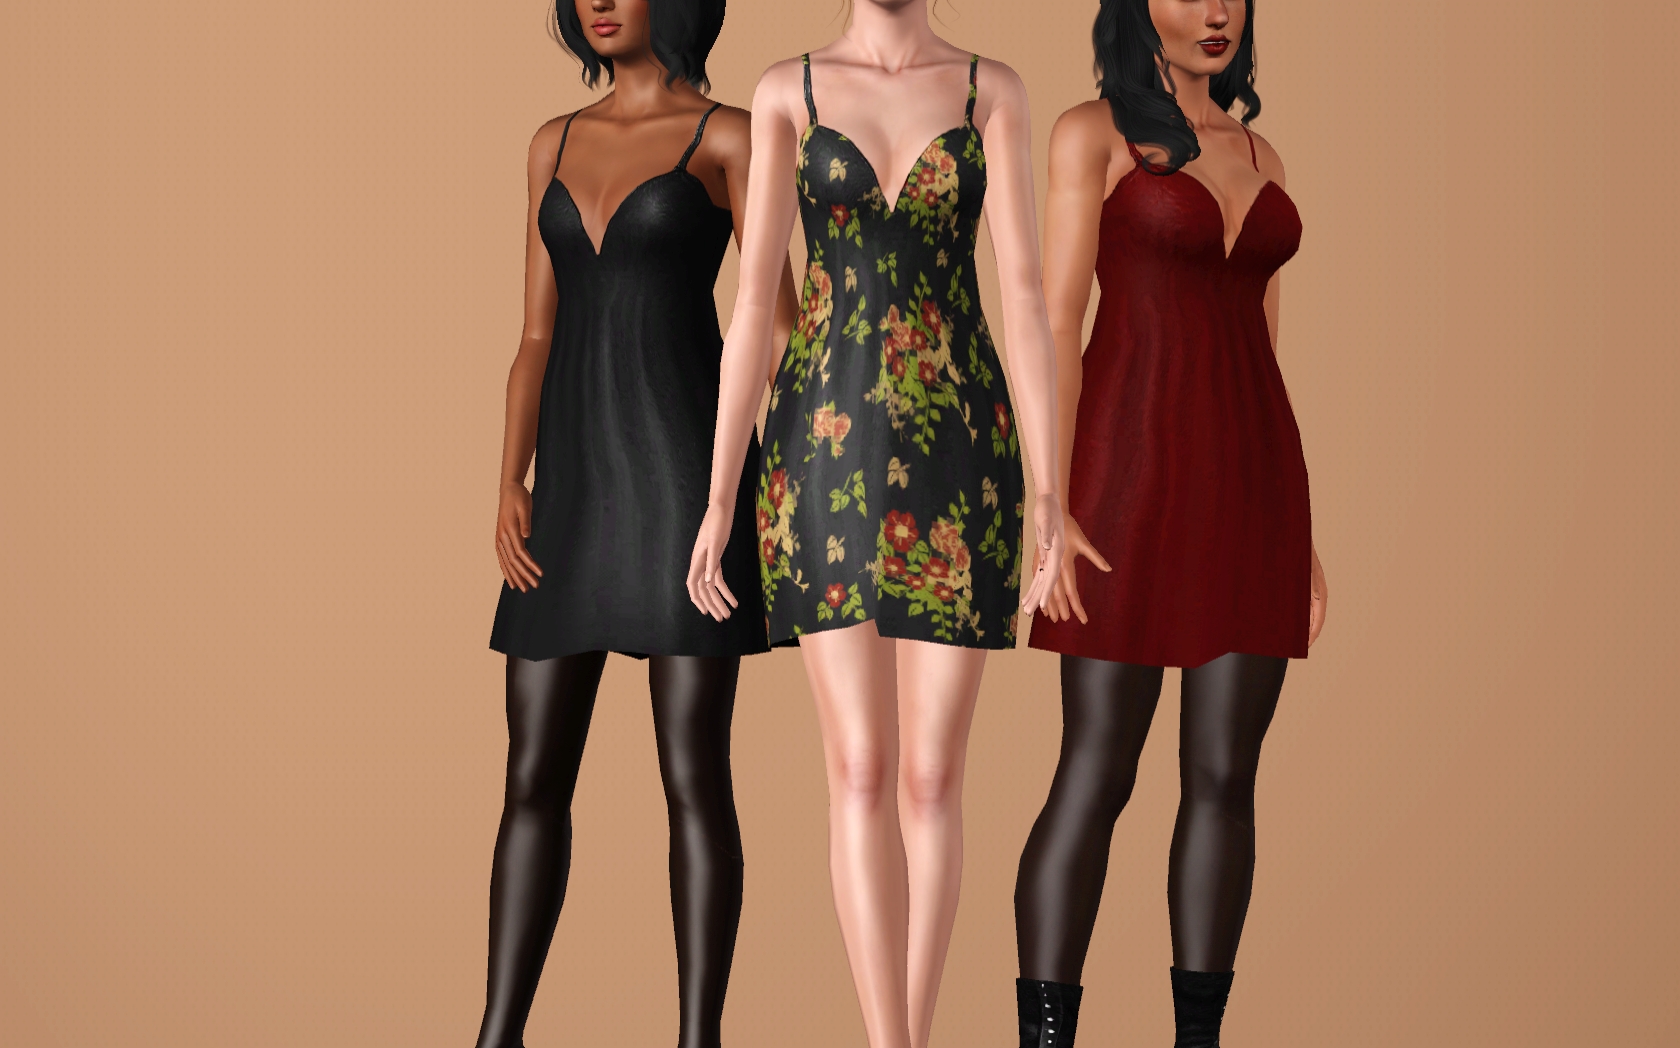 Mod The Sims - "Camisole Dresses" with and without shirt